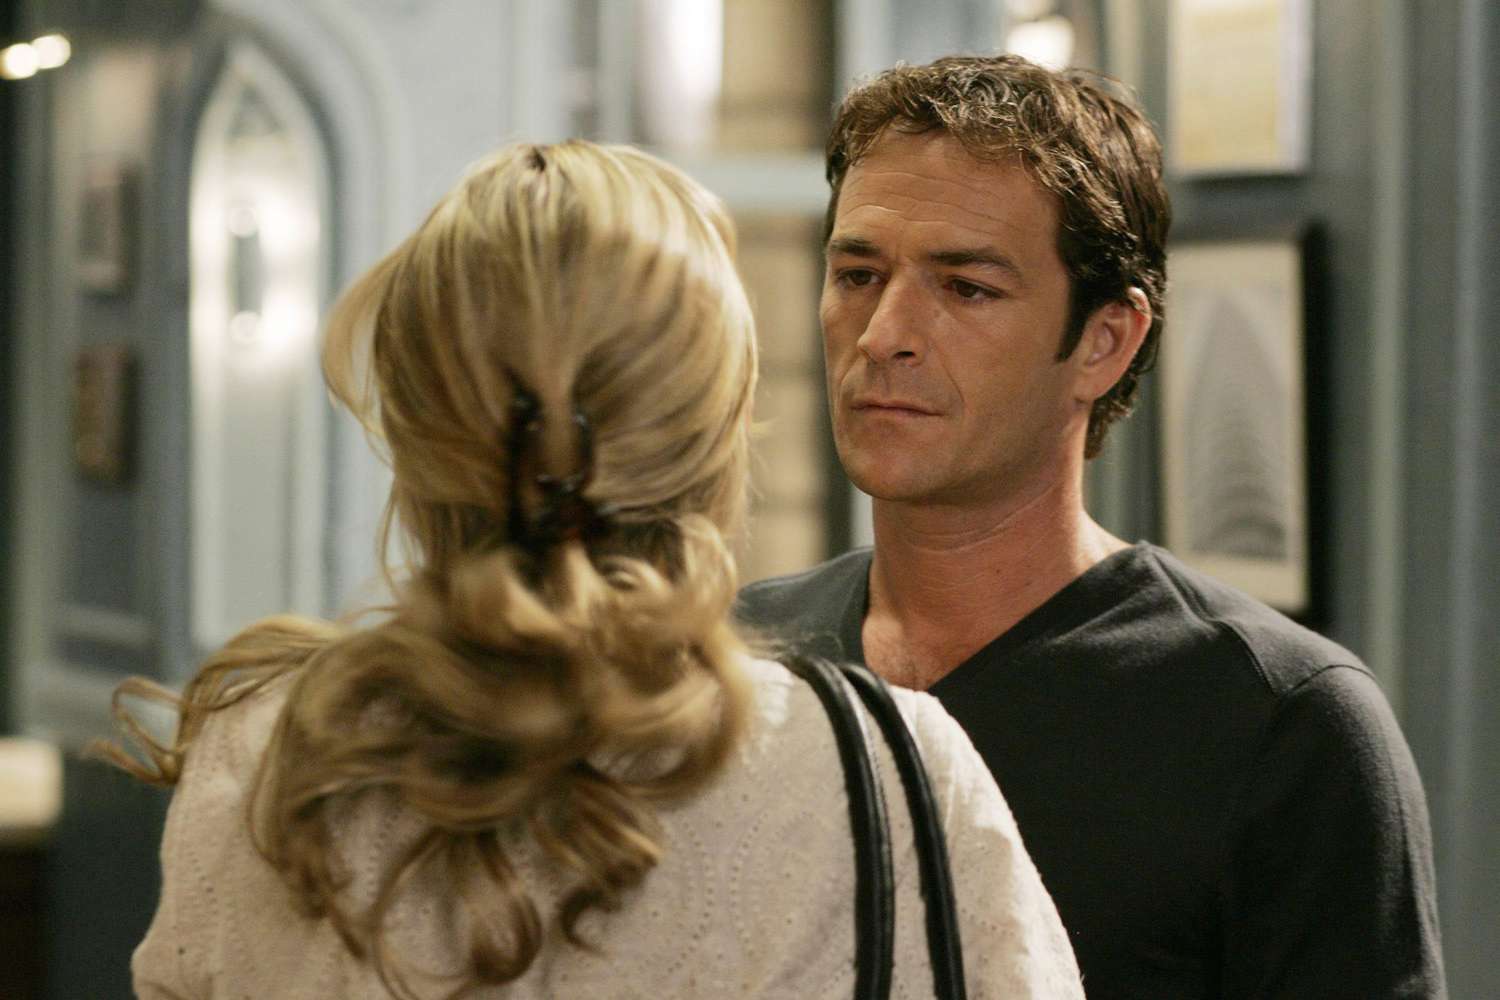 Luke Perry on&nbsp;Law &amp; Order: Special Victims Unit&nbsp;in 2008